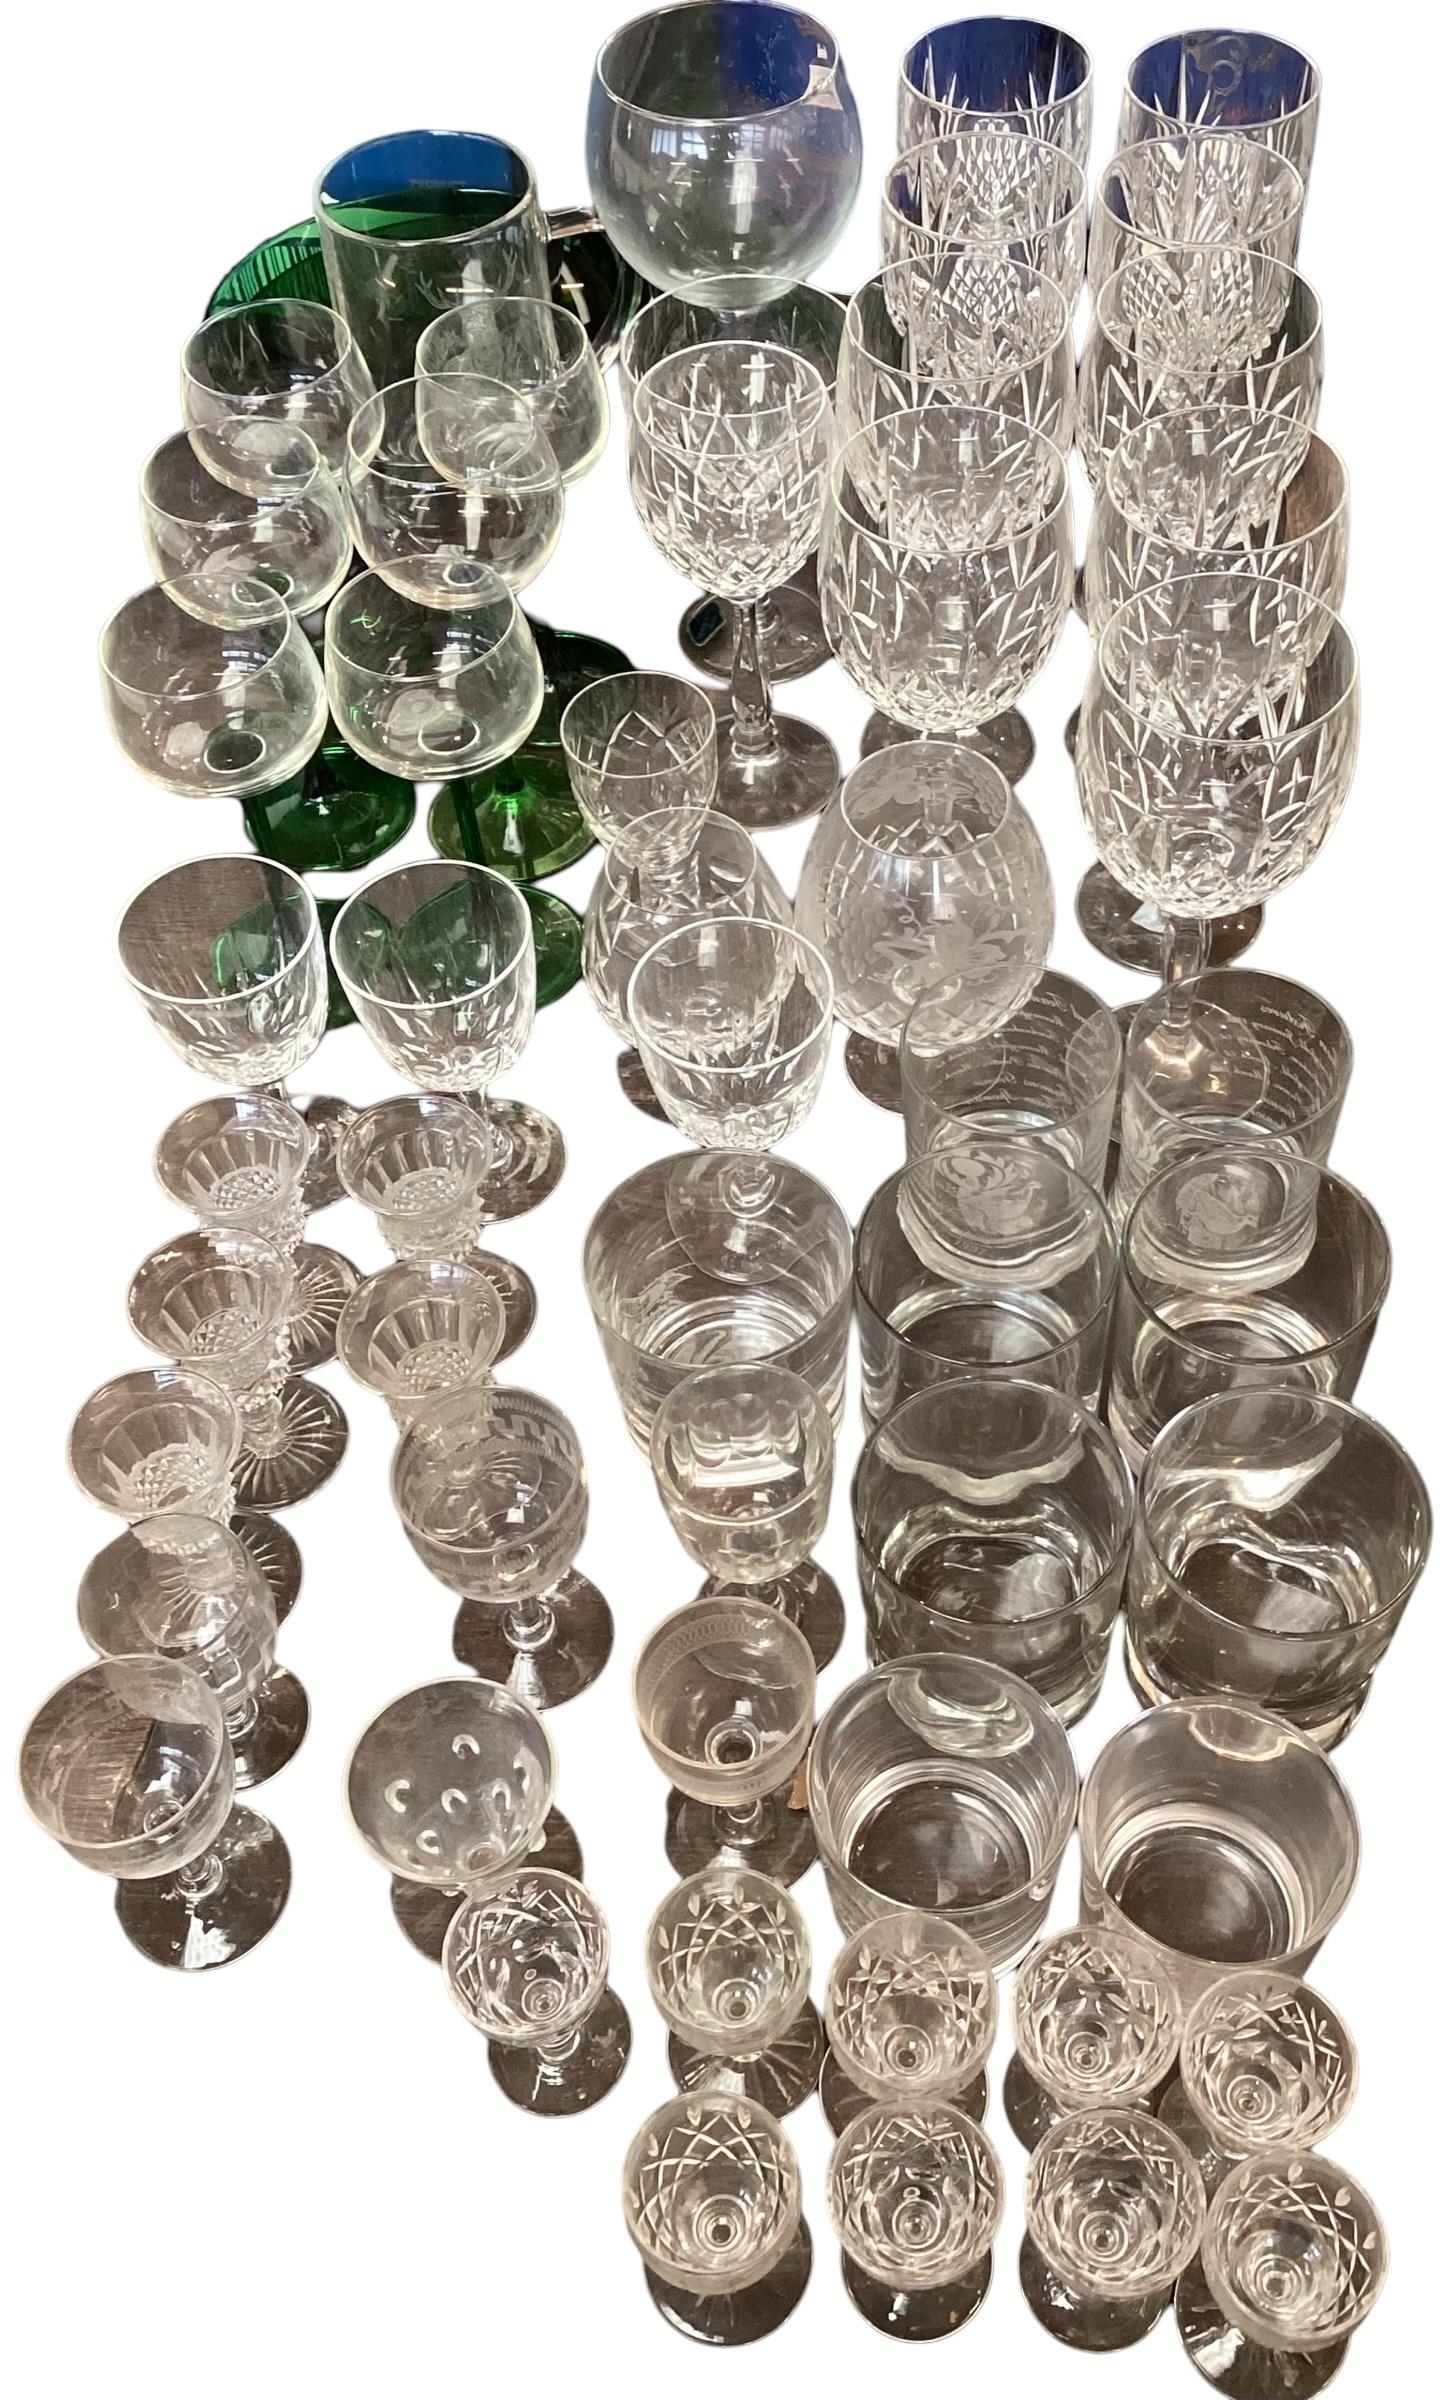 A quantity of good glassware, to include wine glasses, etched sherry glasses, tumblers, a set of 6